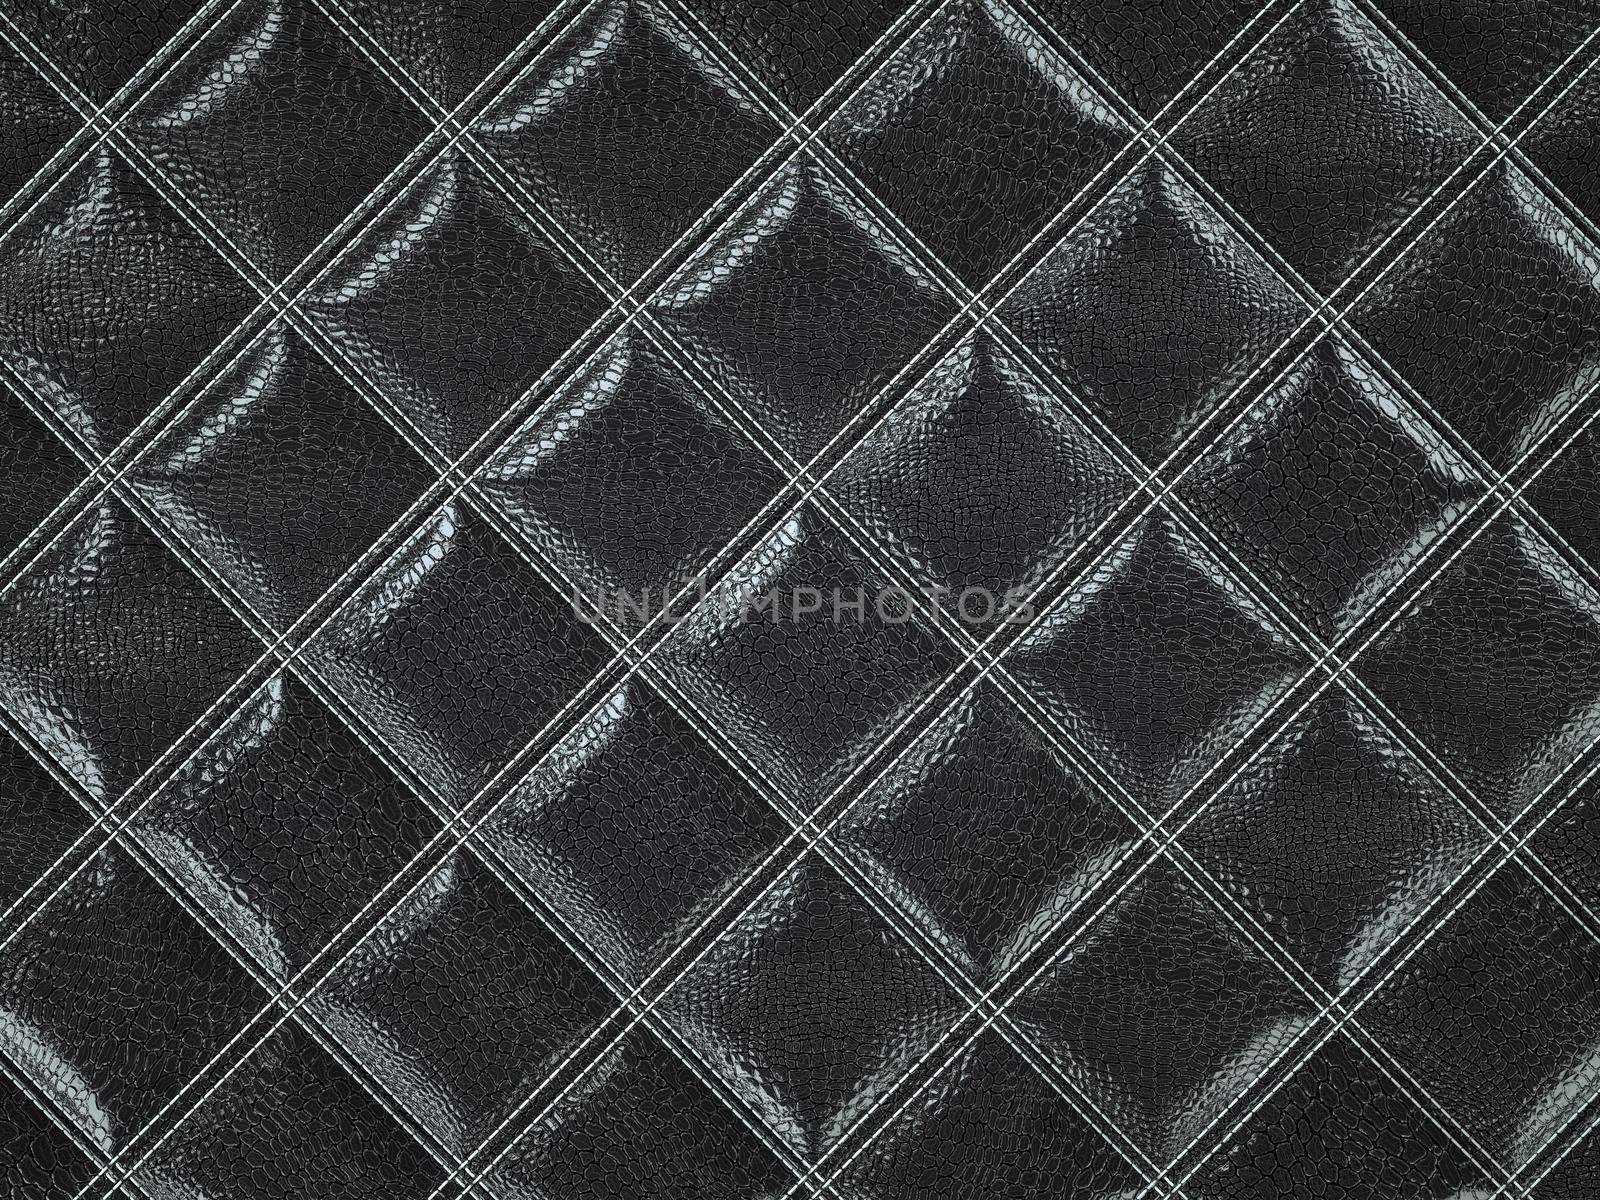 Alligator or crocodile black Leather. Square stitched texture or background with bumps. 3d render, 3d illustration